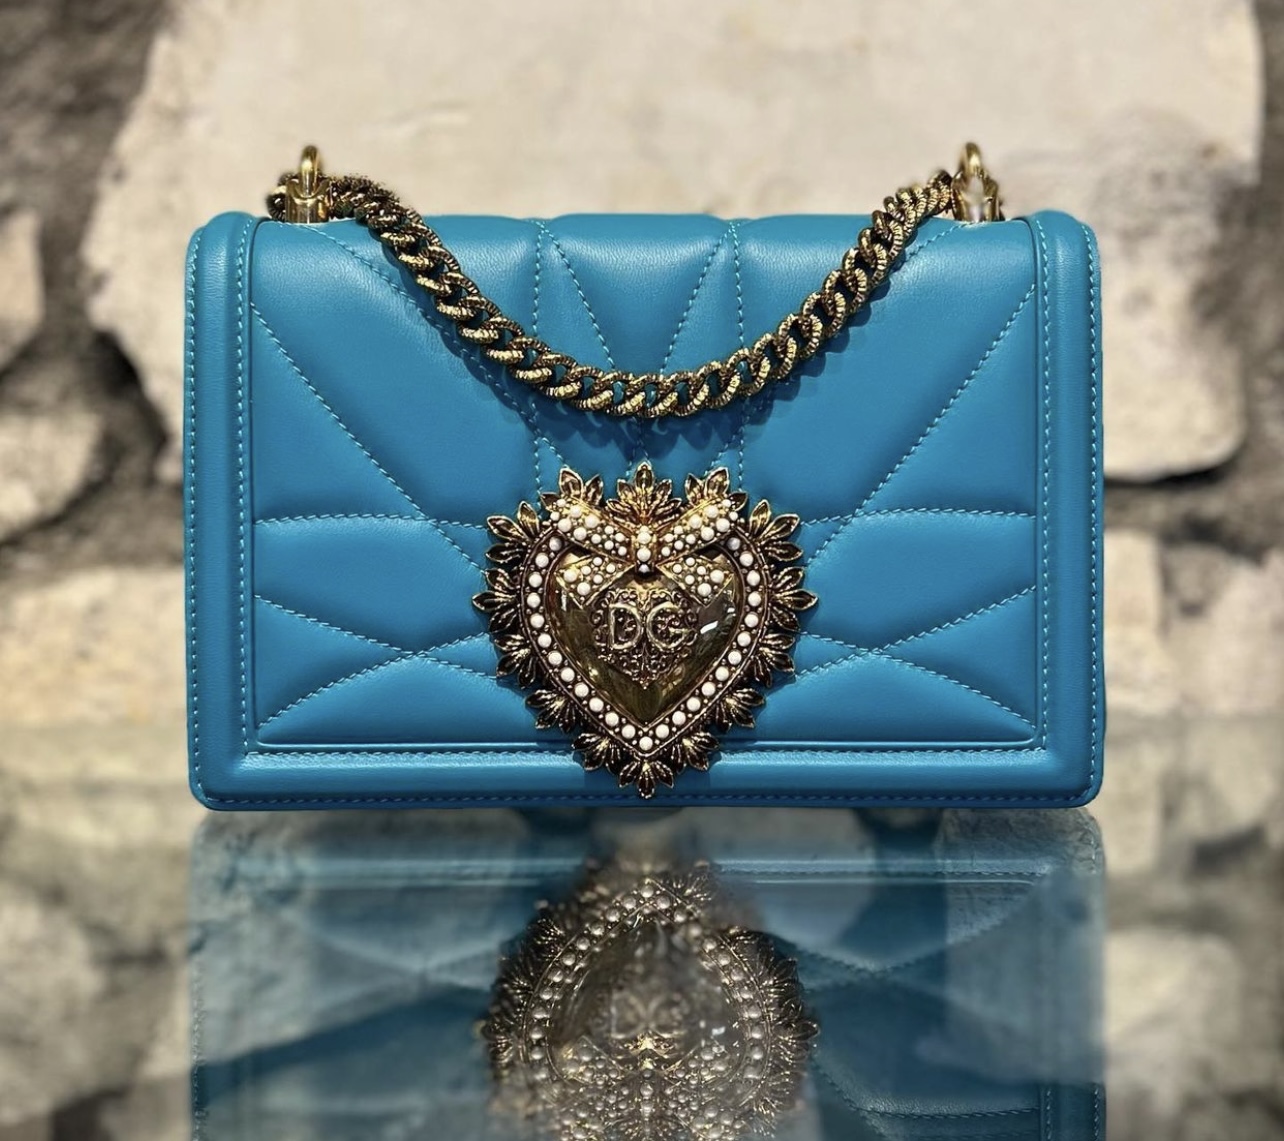 DOLCE & GABBANA Medium Devotion Crossbody Shoulder Bag in Turquoise - More  Than You Can Imagine